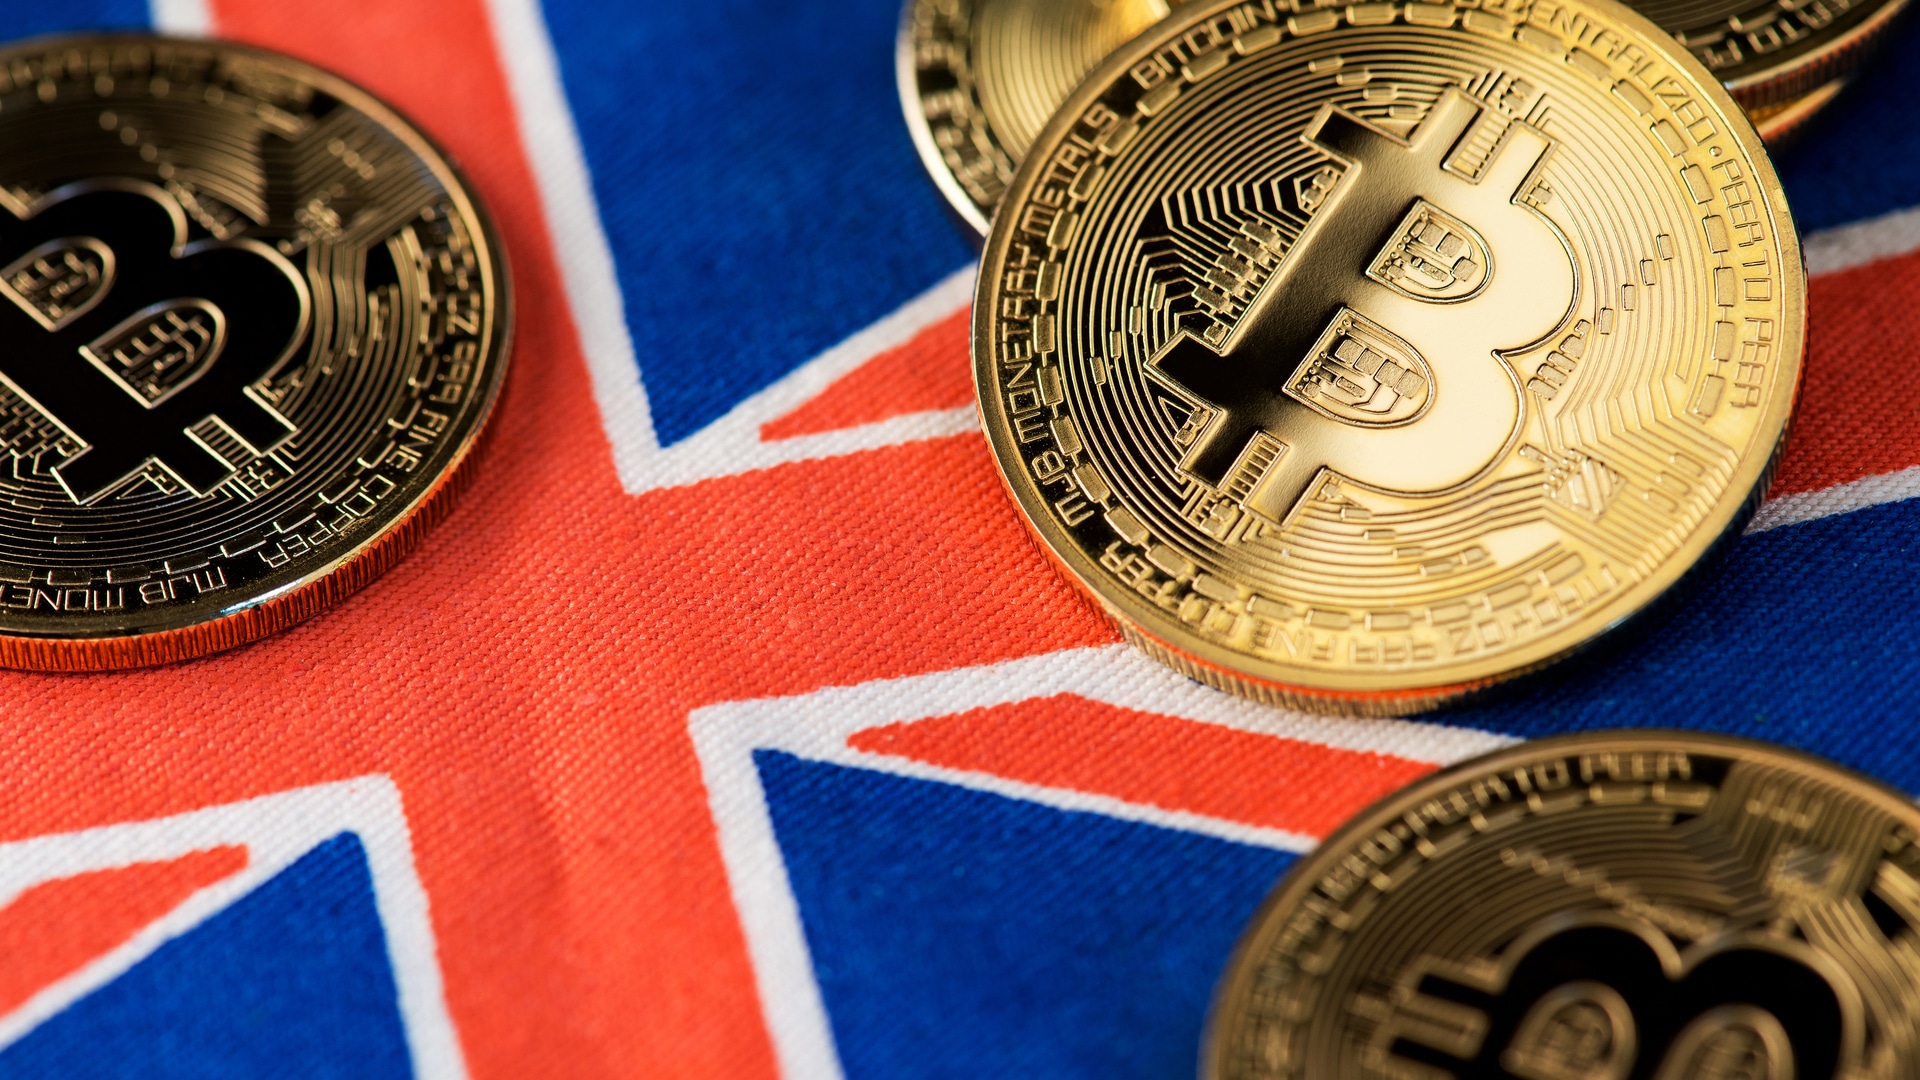 UK vows to jail anyone who promotes cryptocurrencies